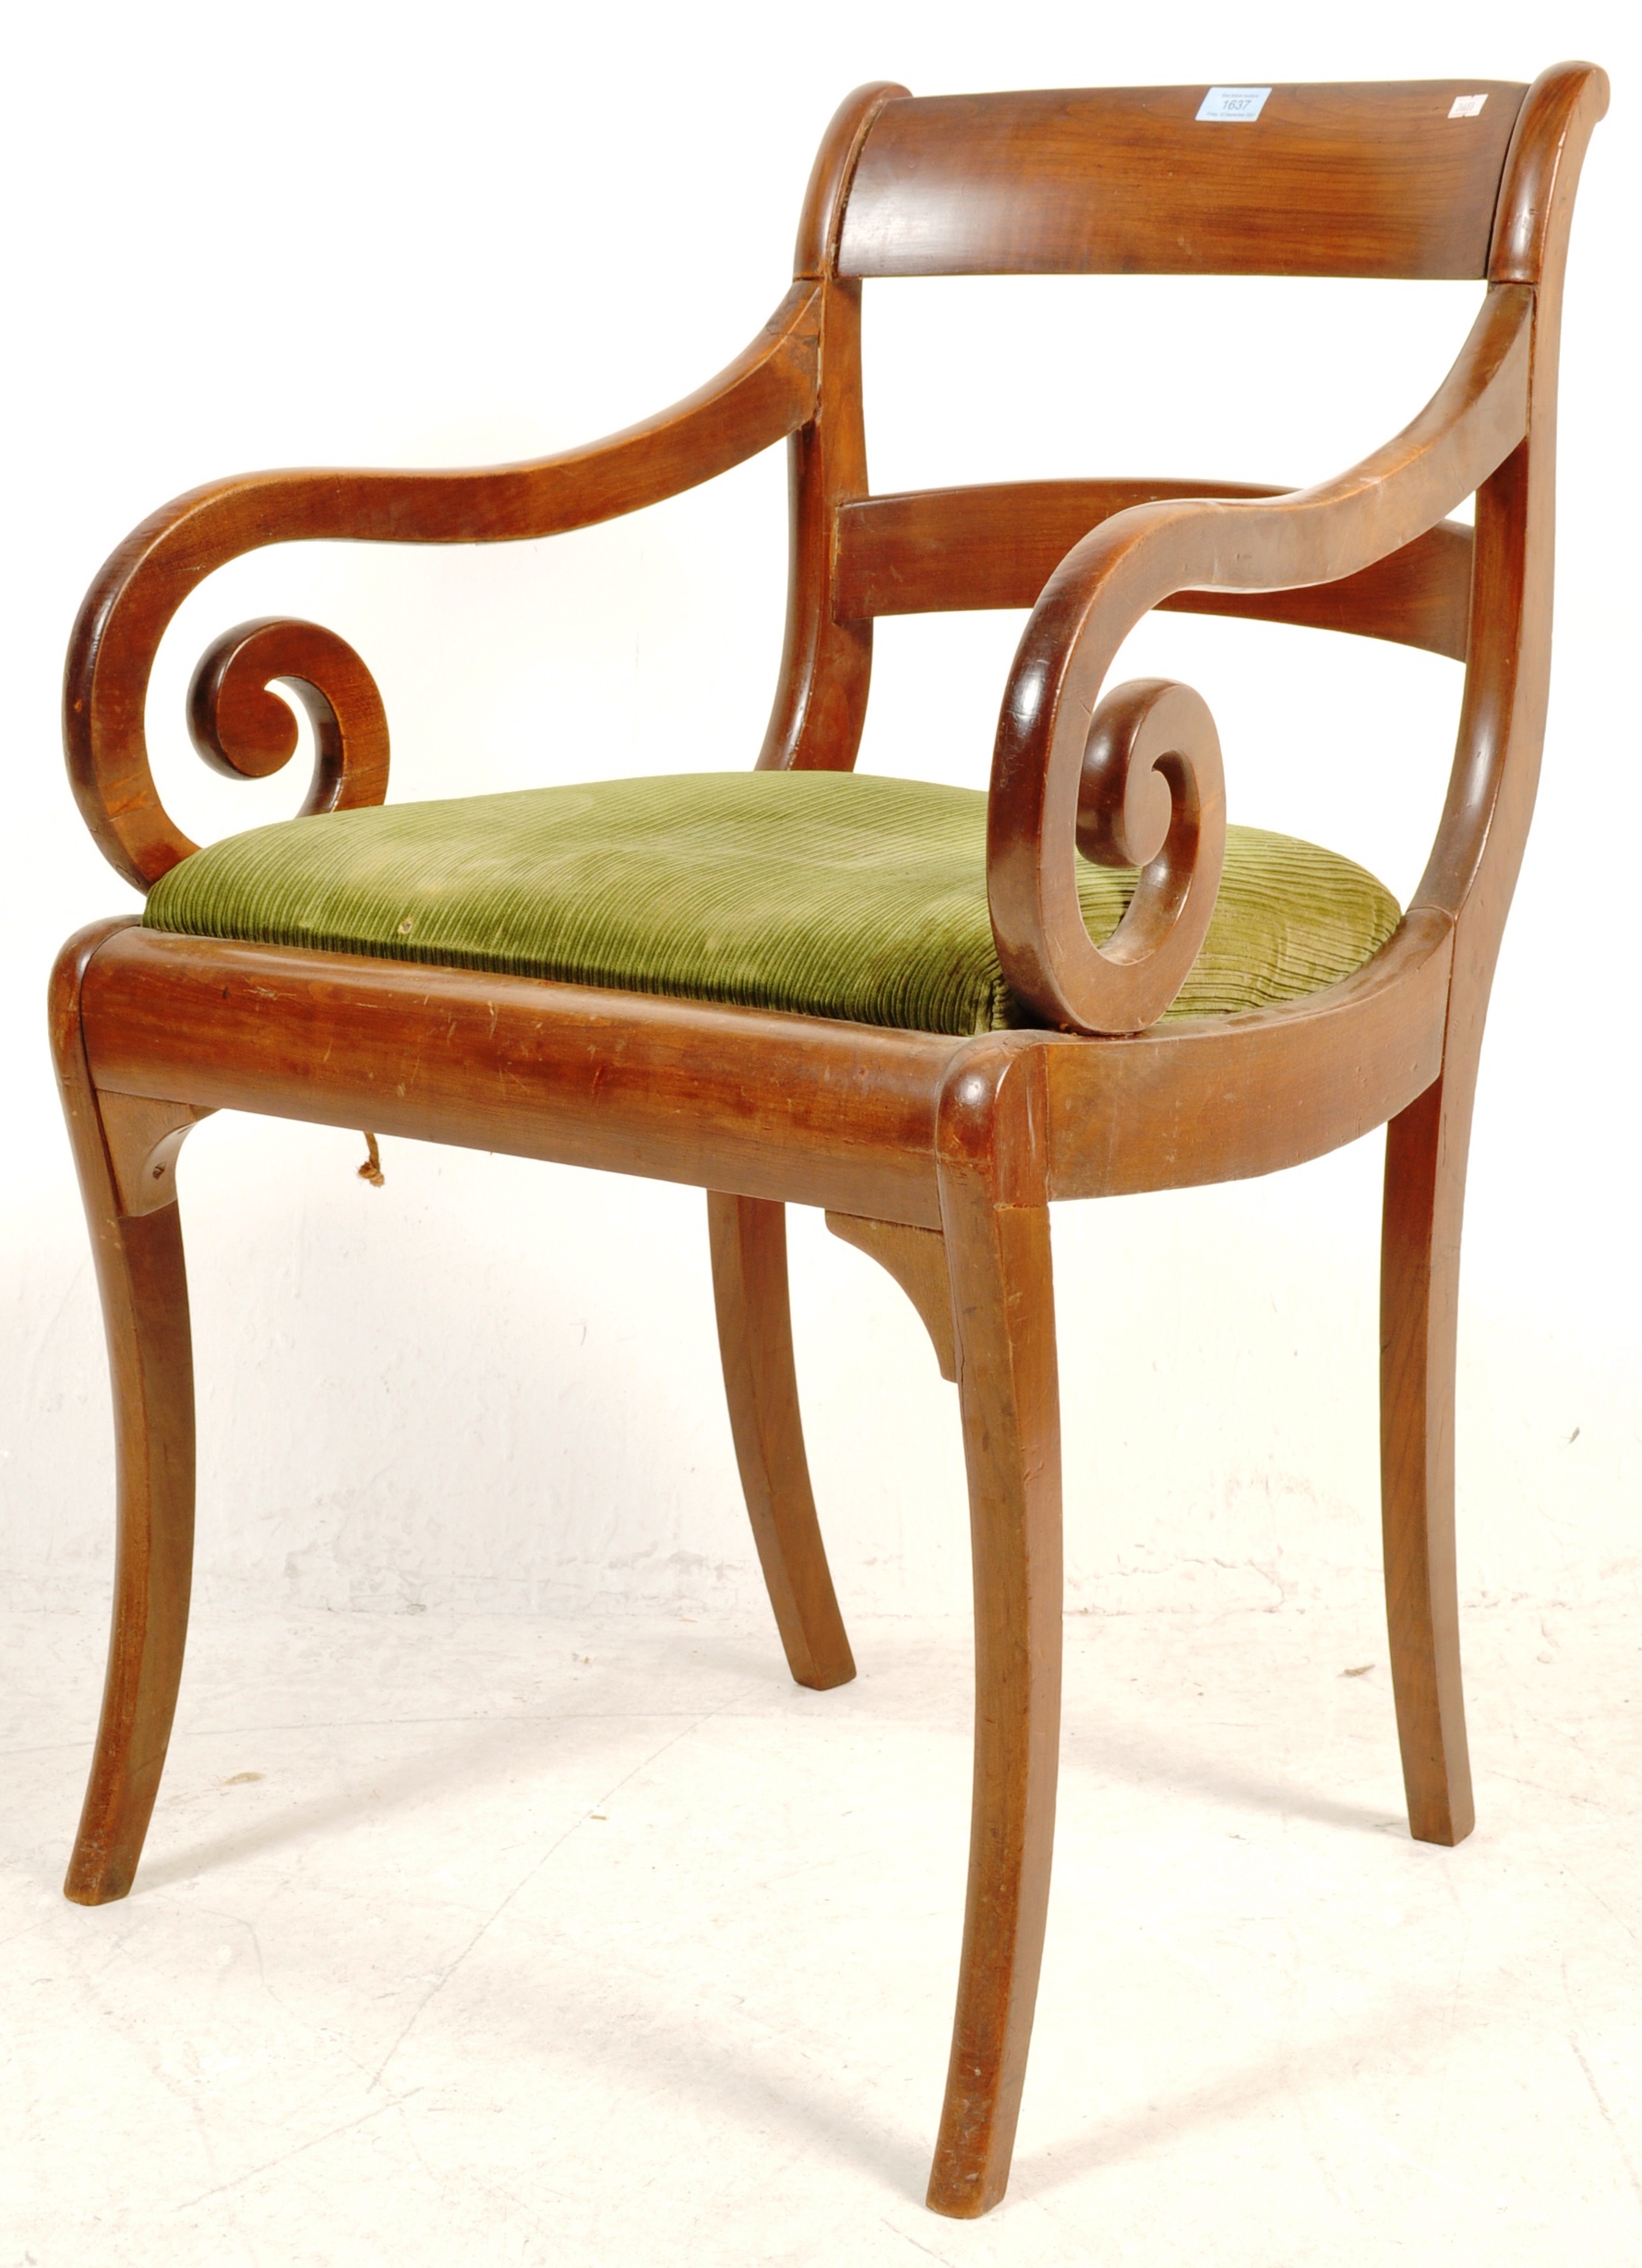 EARLY 19TH CENTURY REGENCY MAHOGANY SCROLLED ARM CHAIR - Image 2 of 8